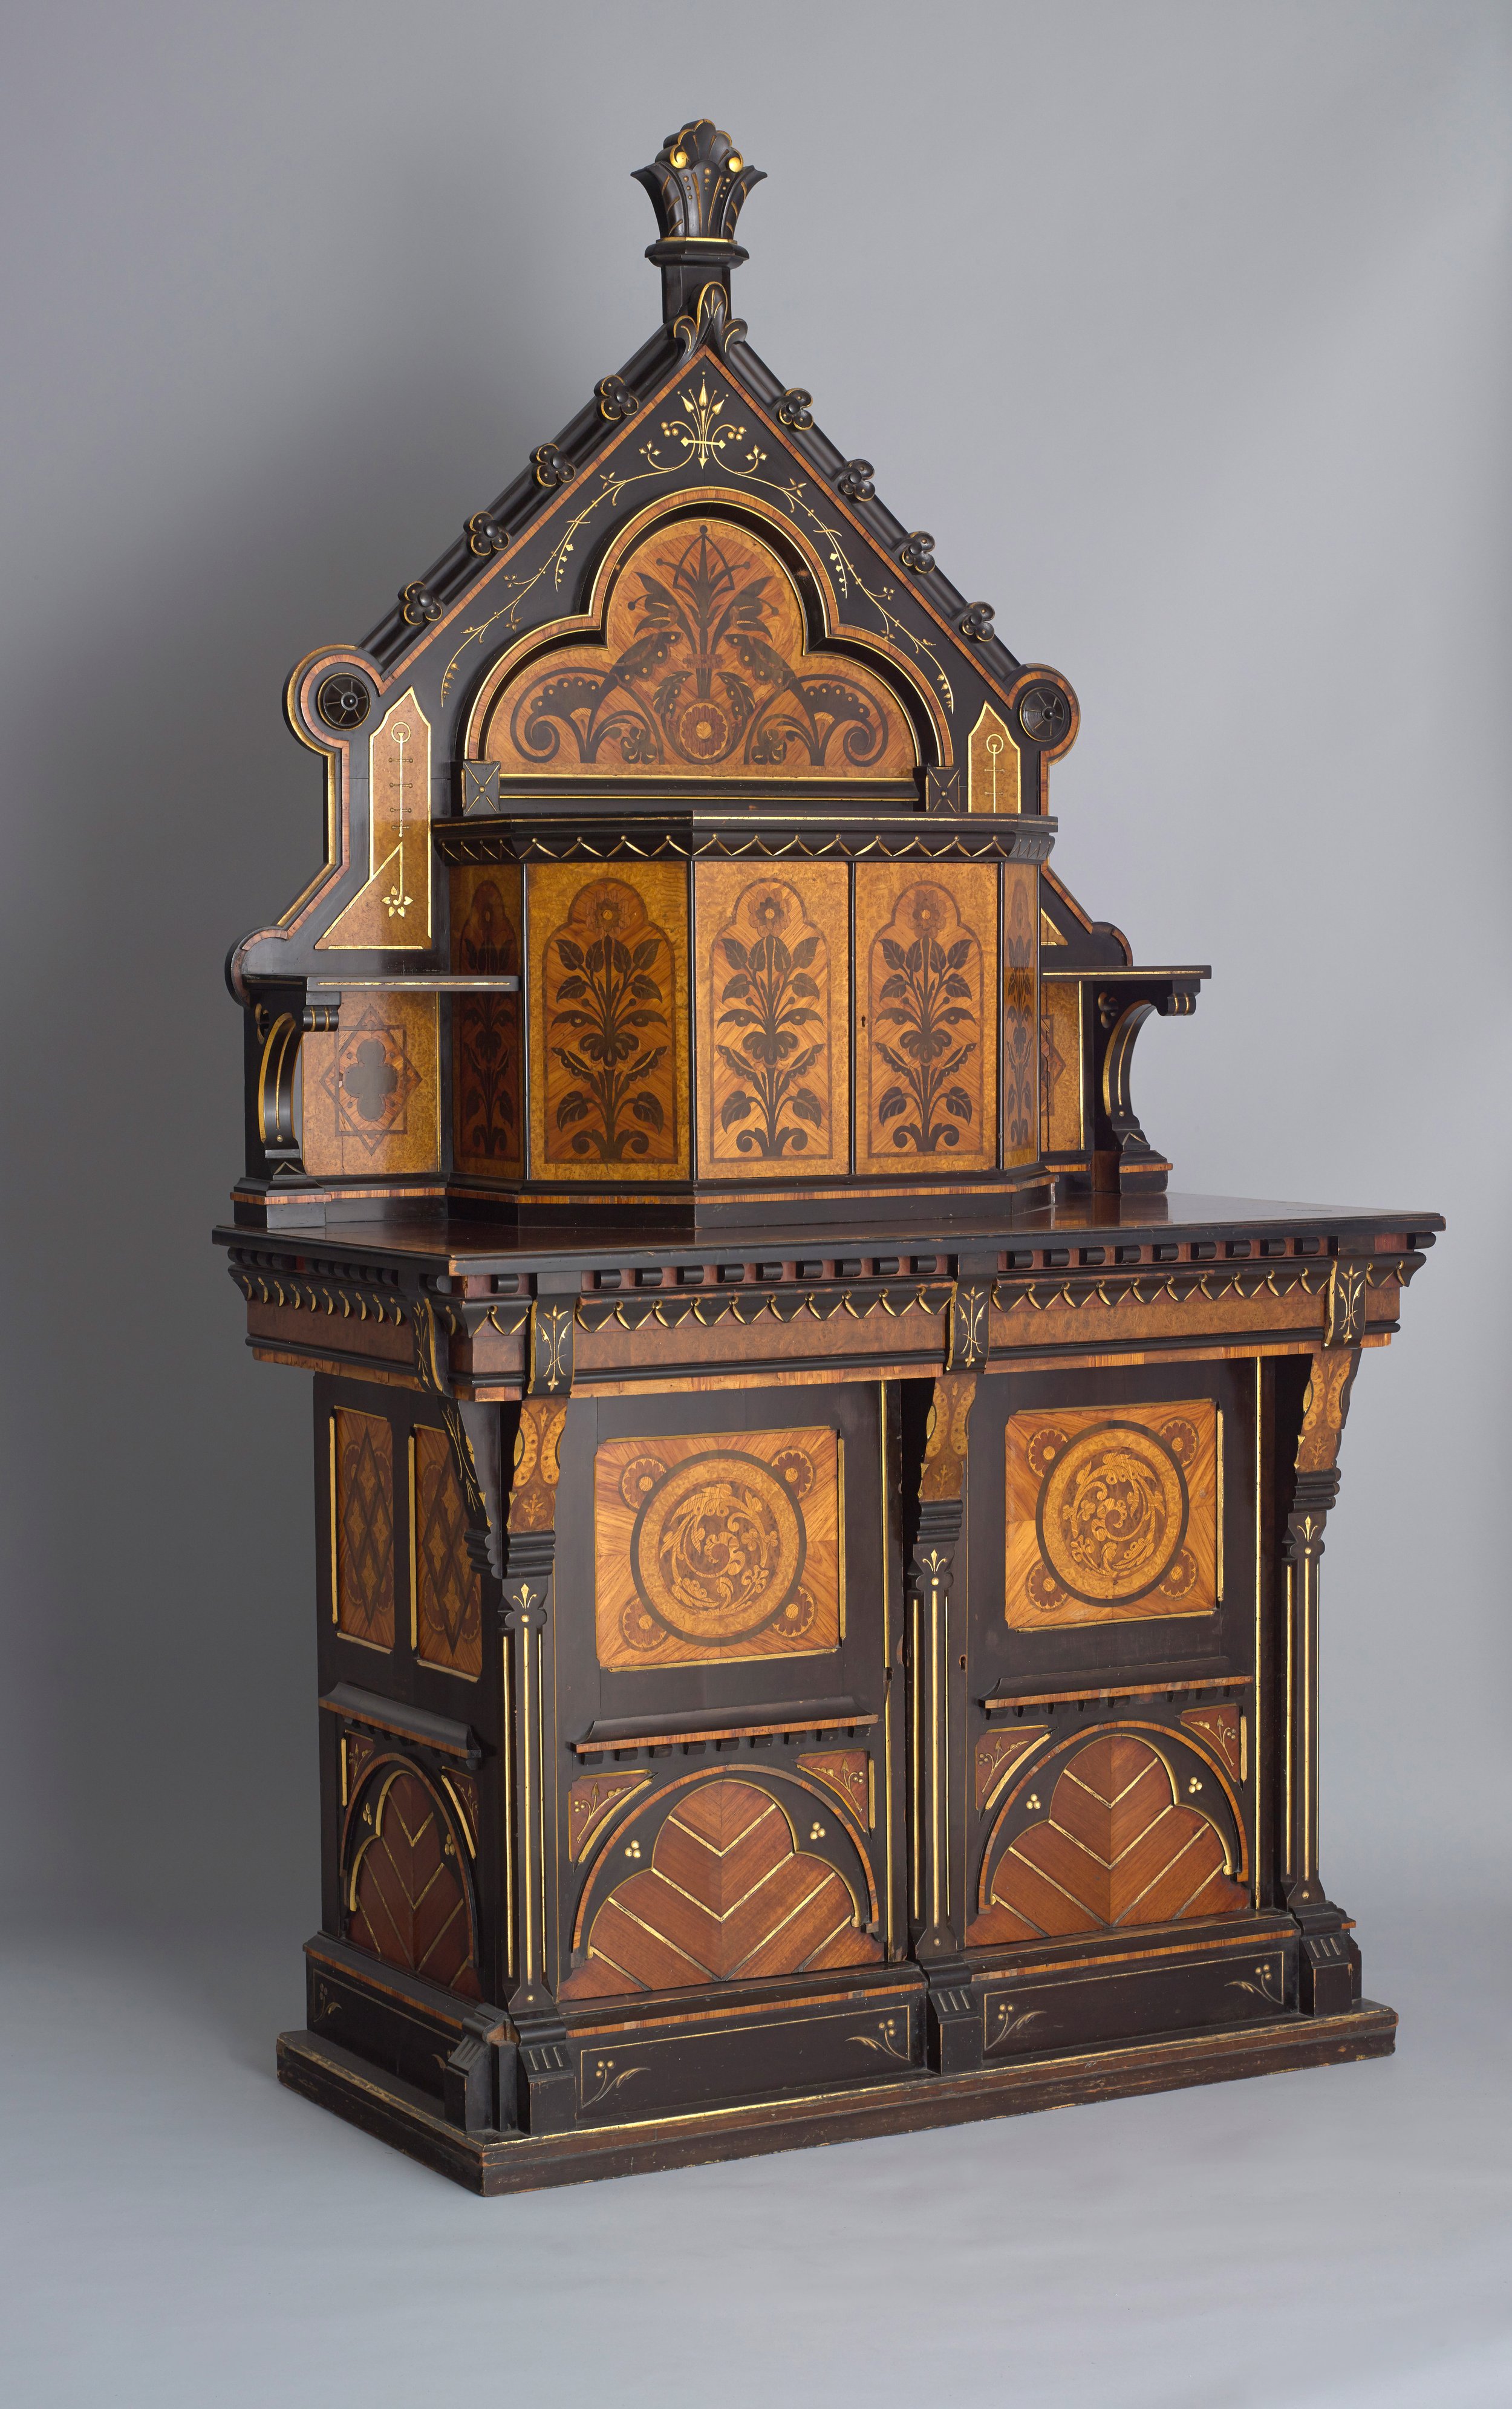   Bruce James Talbert  England, 1838–1881  Cabinet , circa 1867 walnut with gilt, incised, and ebonized marquetry, 87 1/4 x 47 1/8 x 24 5/8 inches Museum purchase, 1985.99a-i 